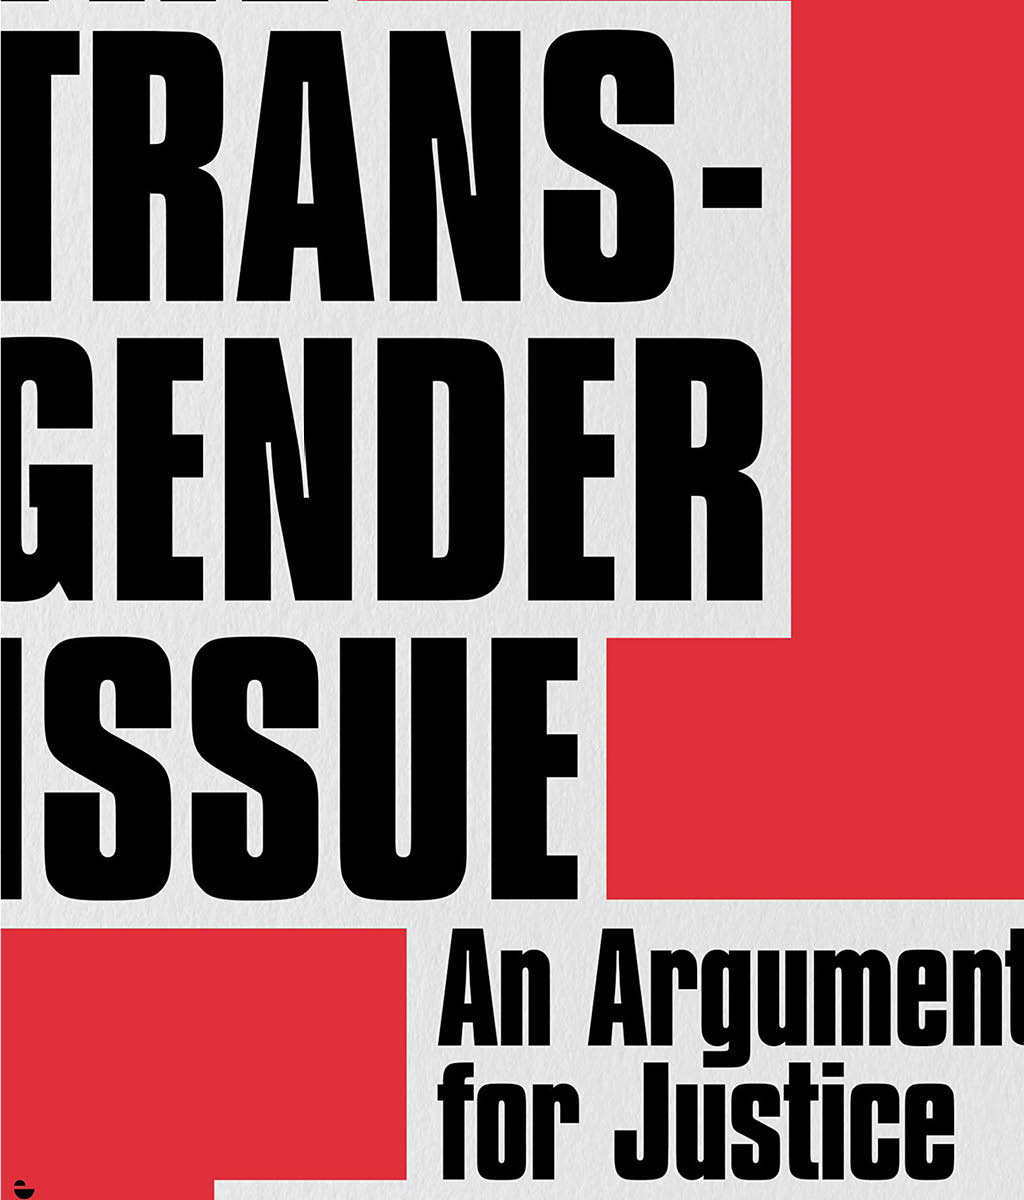 The Transgender Issue : An Argument for Justice